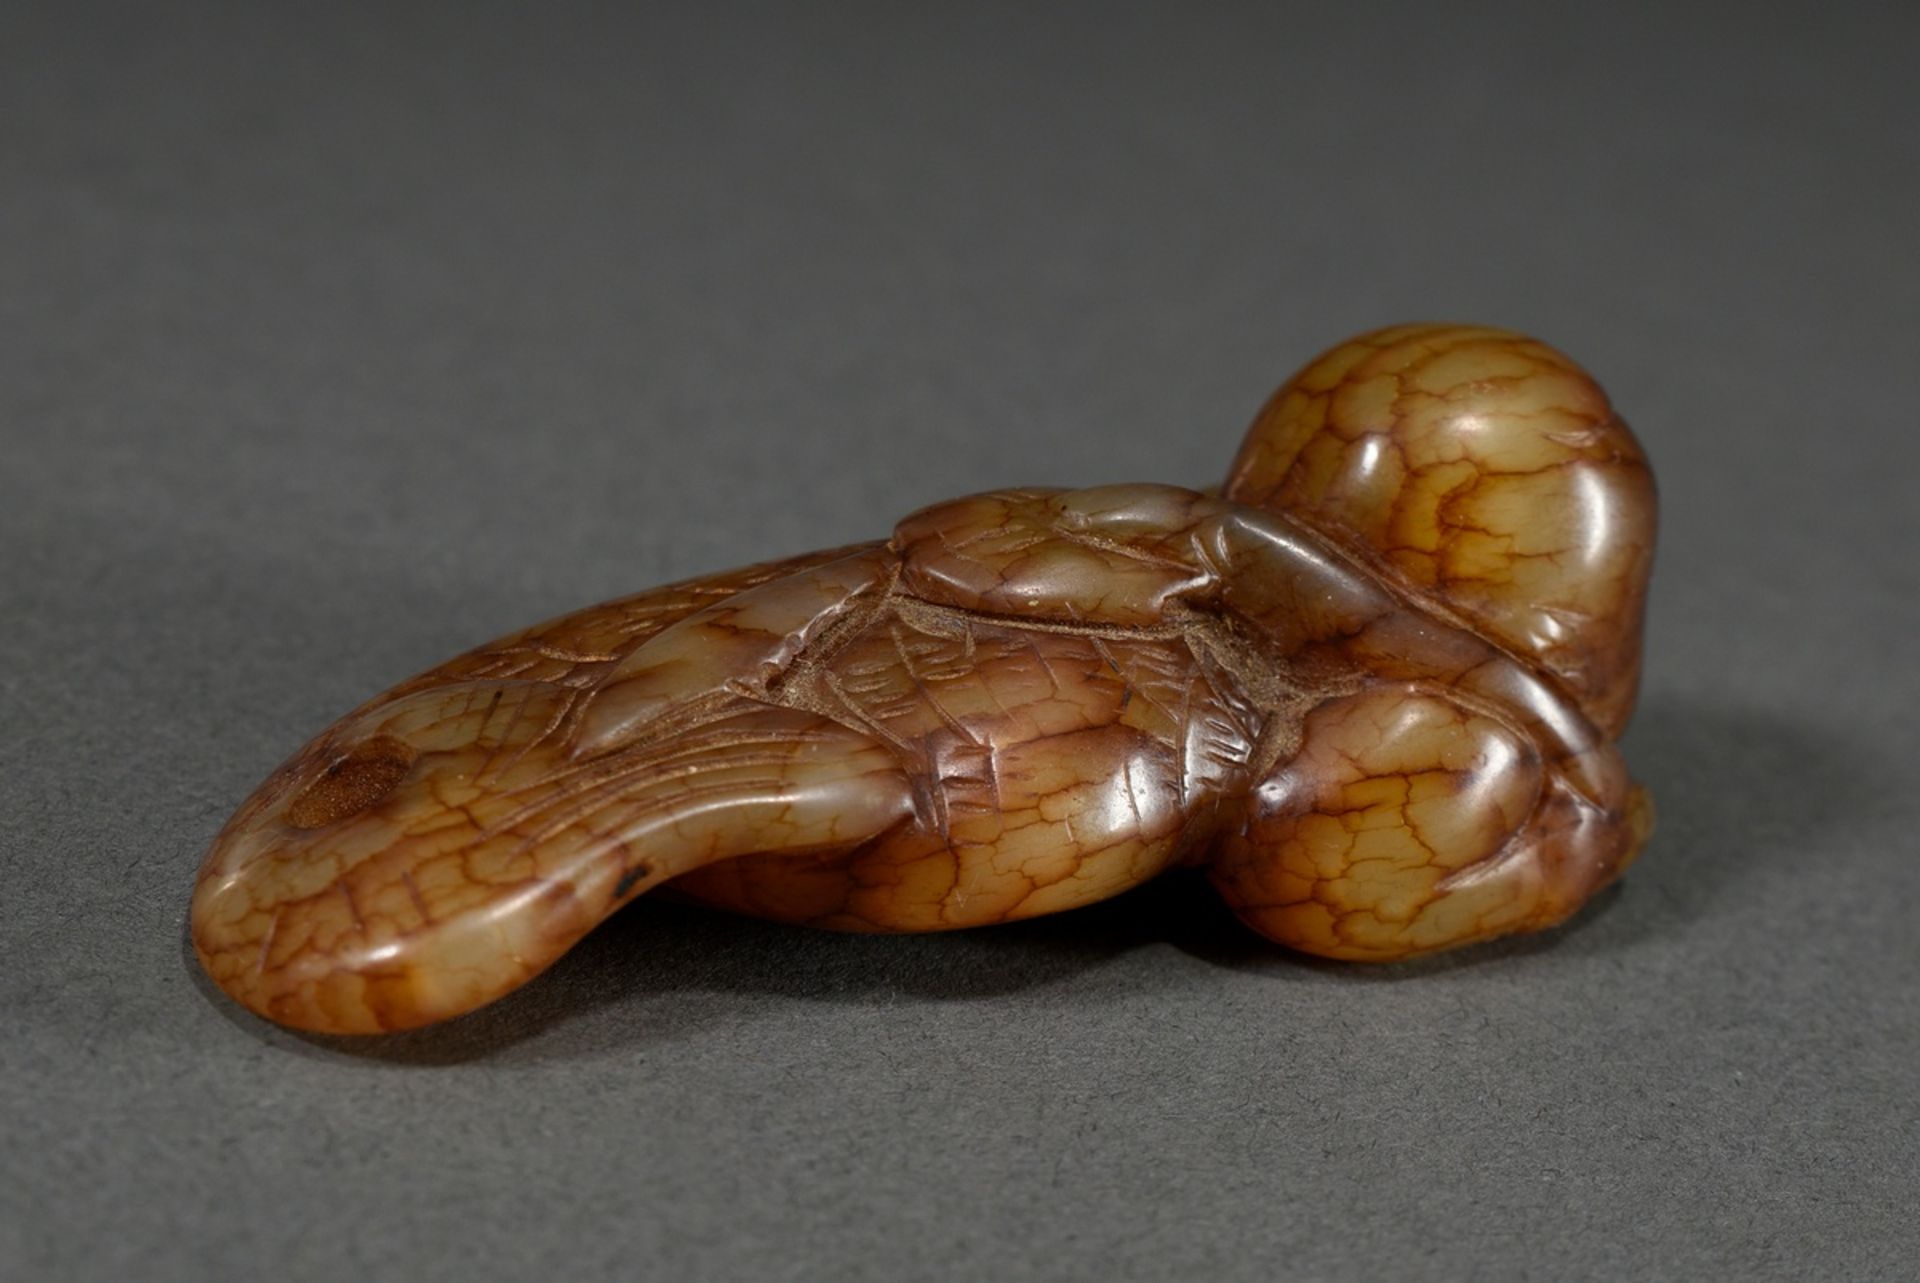 Fine figure of brown veined jade "Lying Mermaid", Ming or later, China, l. 7.5cm - Image 2 of 6